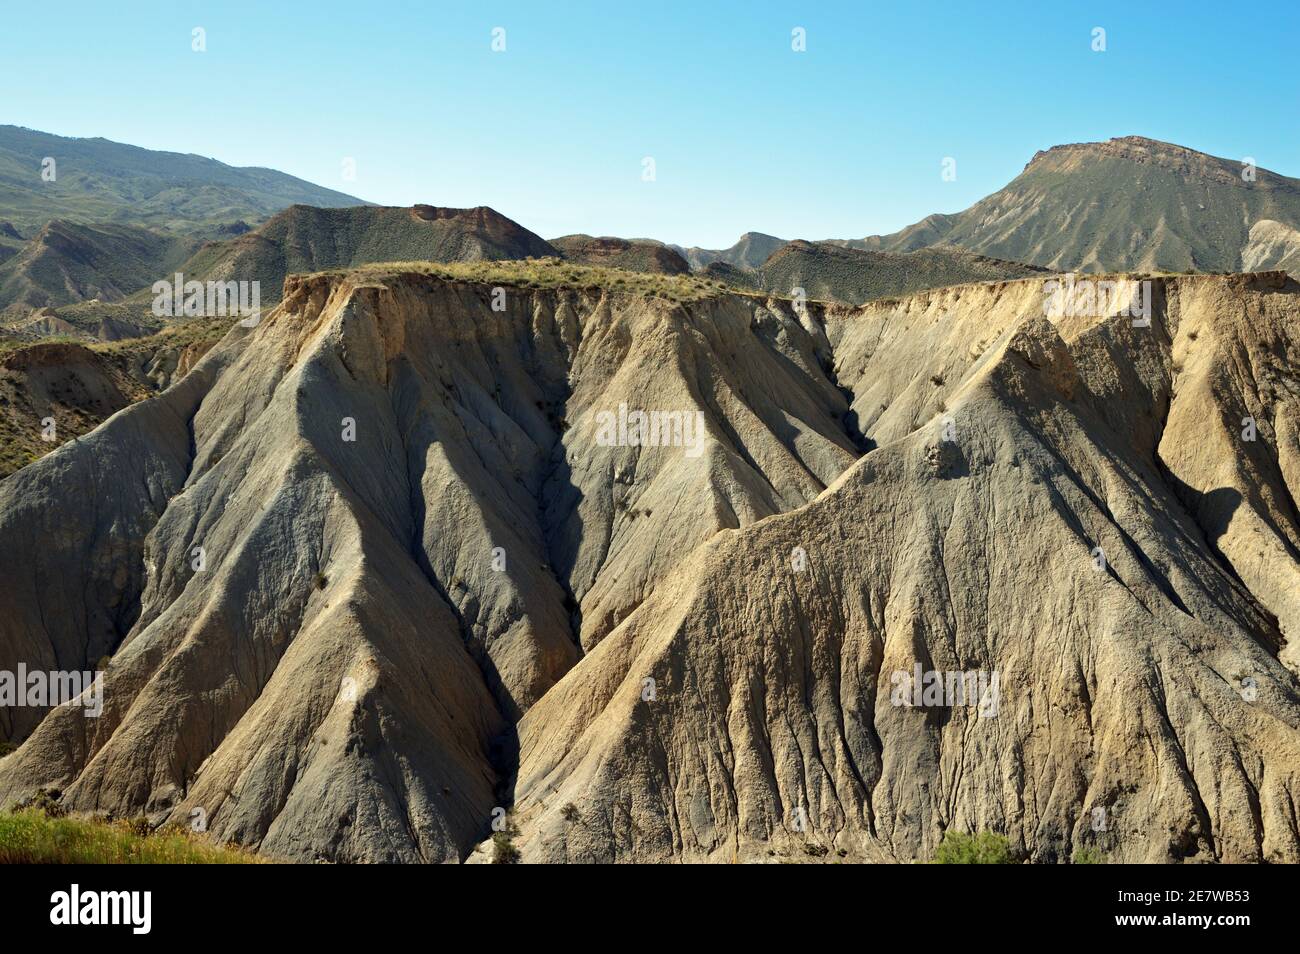 The Tabernas Desert is in the Spanish province of Almería. It is the driest region of Europe and the continent's only true desert climate. Stock Photo